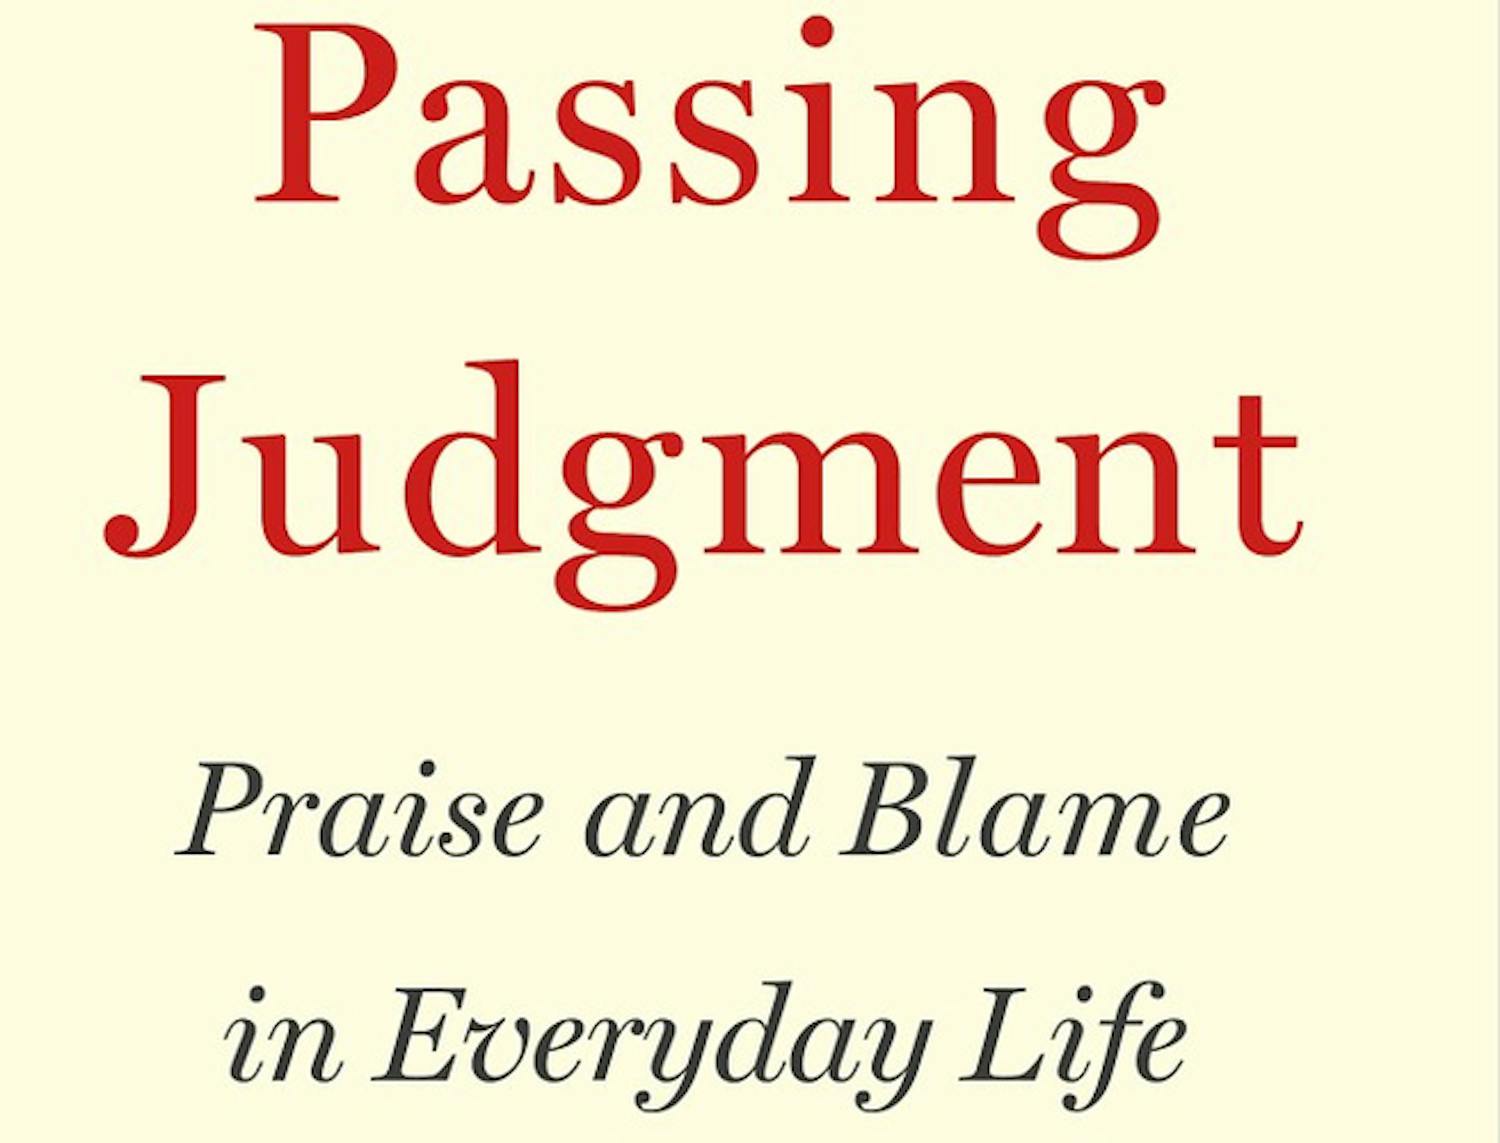 Chapter 243: 'Passing Judgment' with Terri Apter